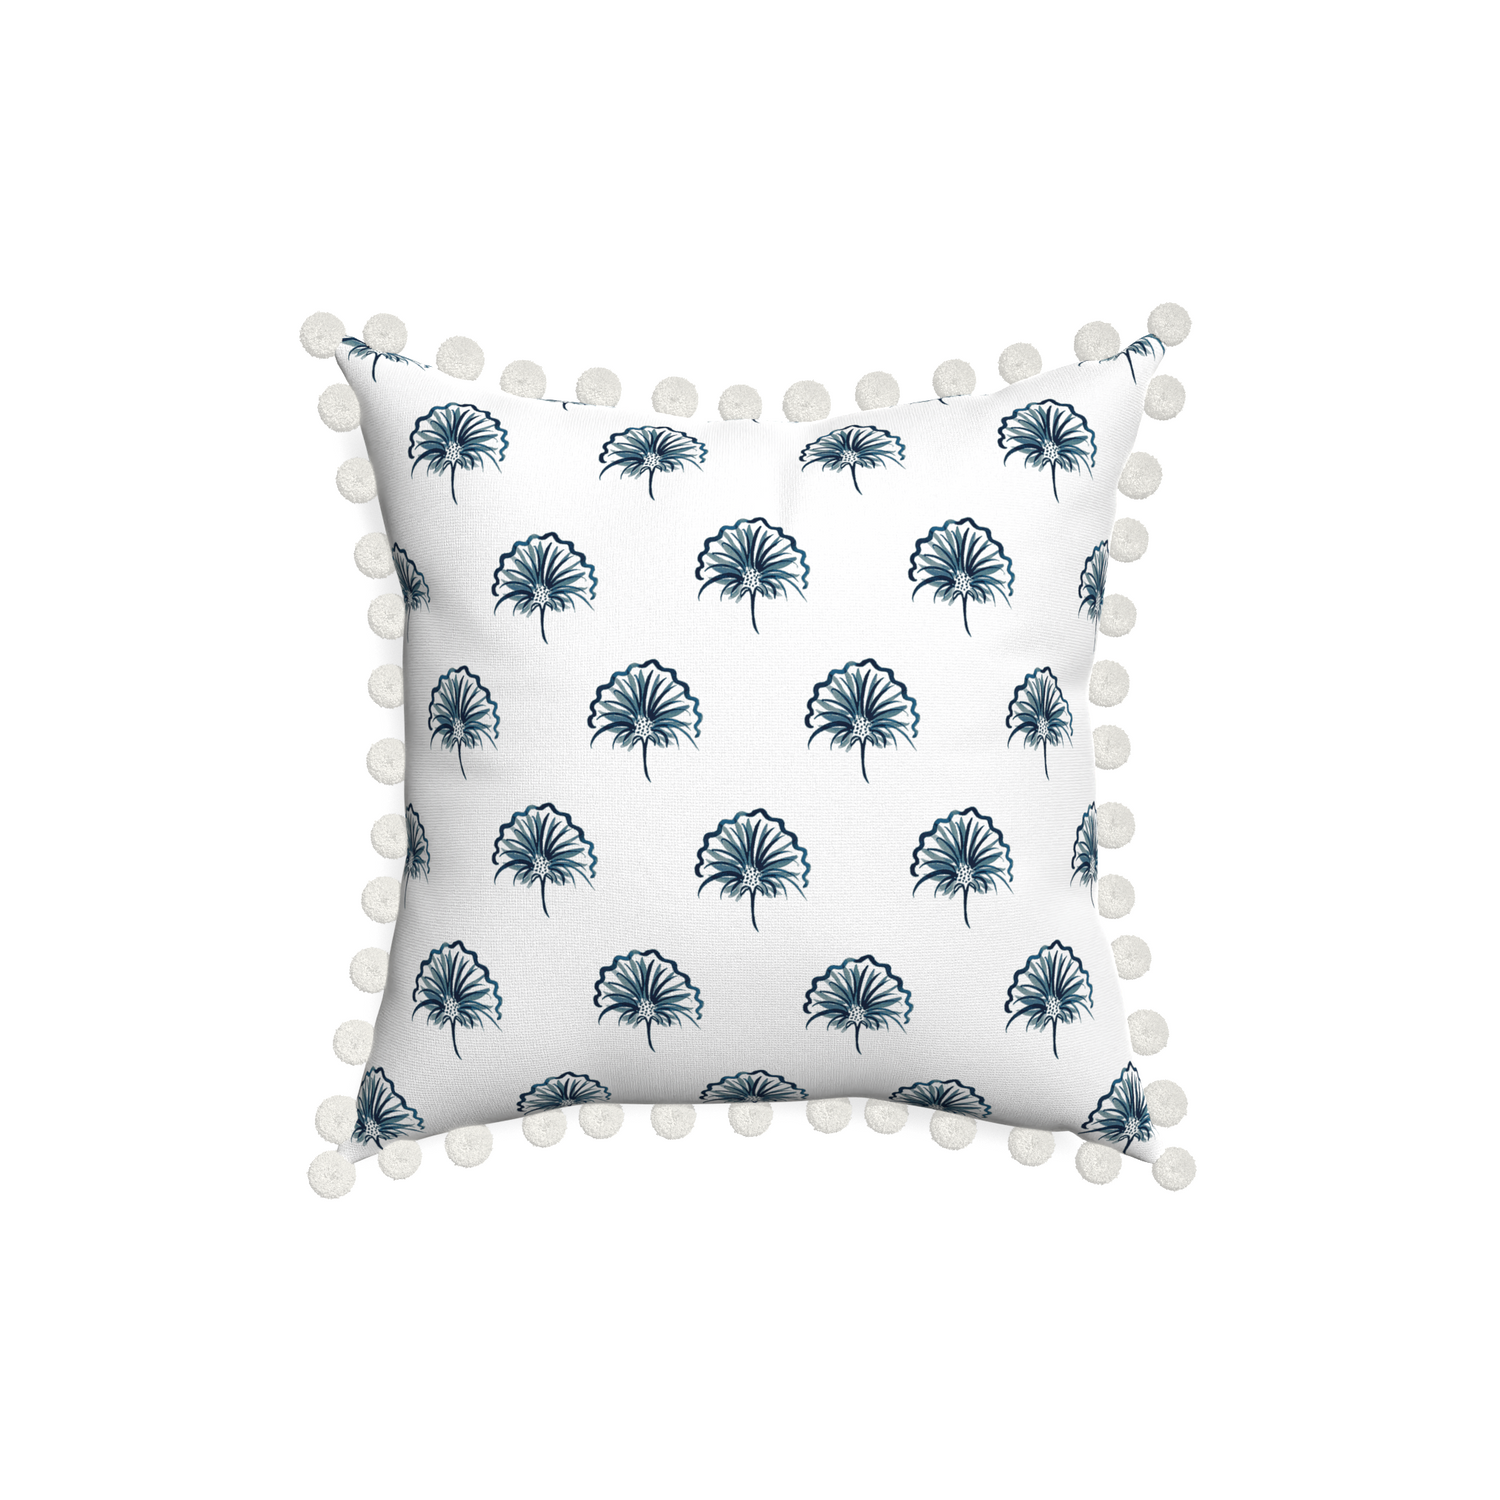 18-square penelope midnight custom floral navypillow with snow pom pom on white background